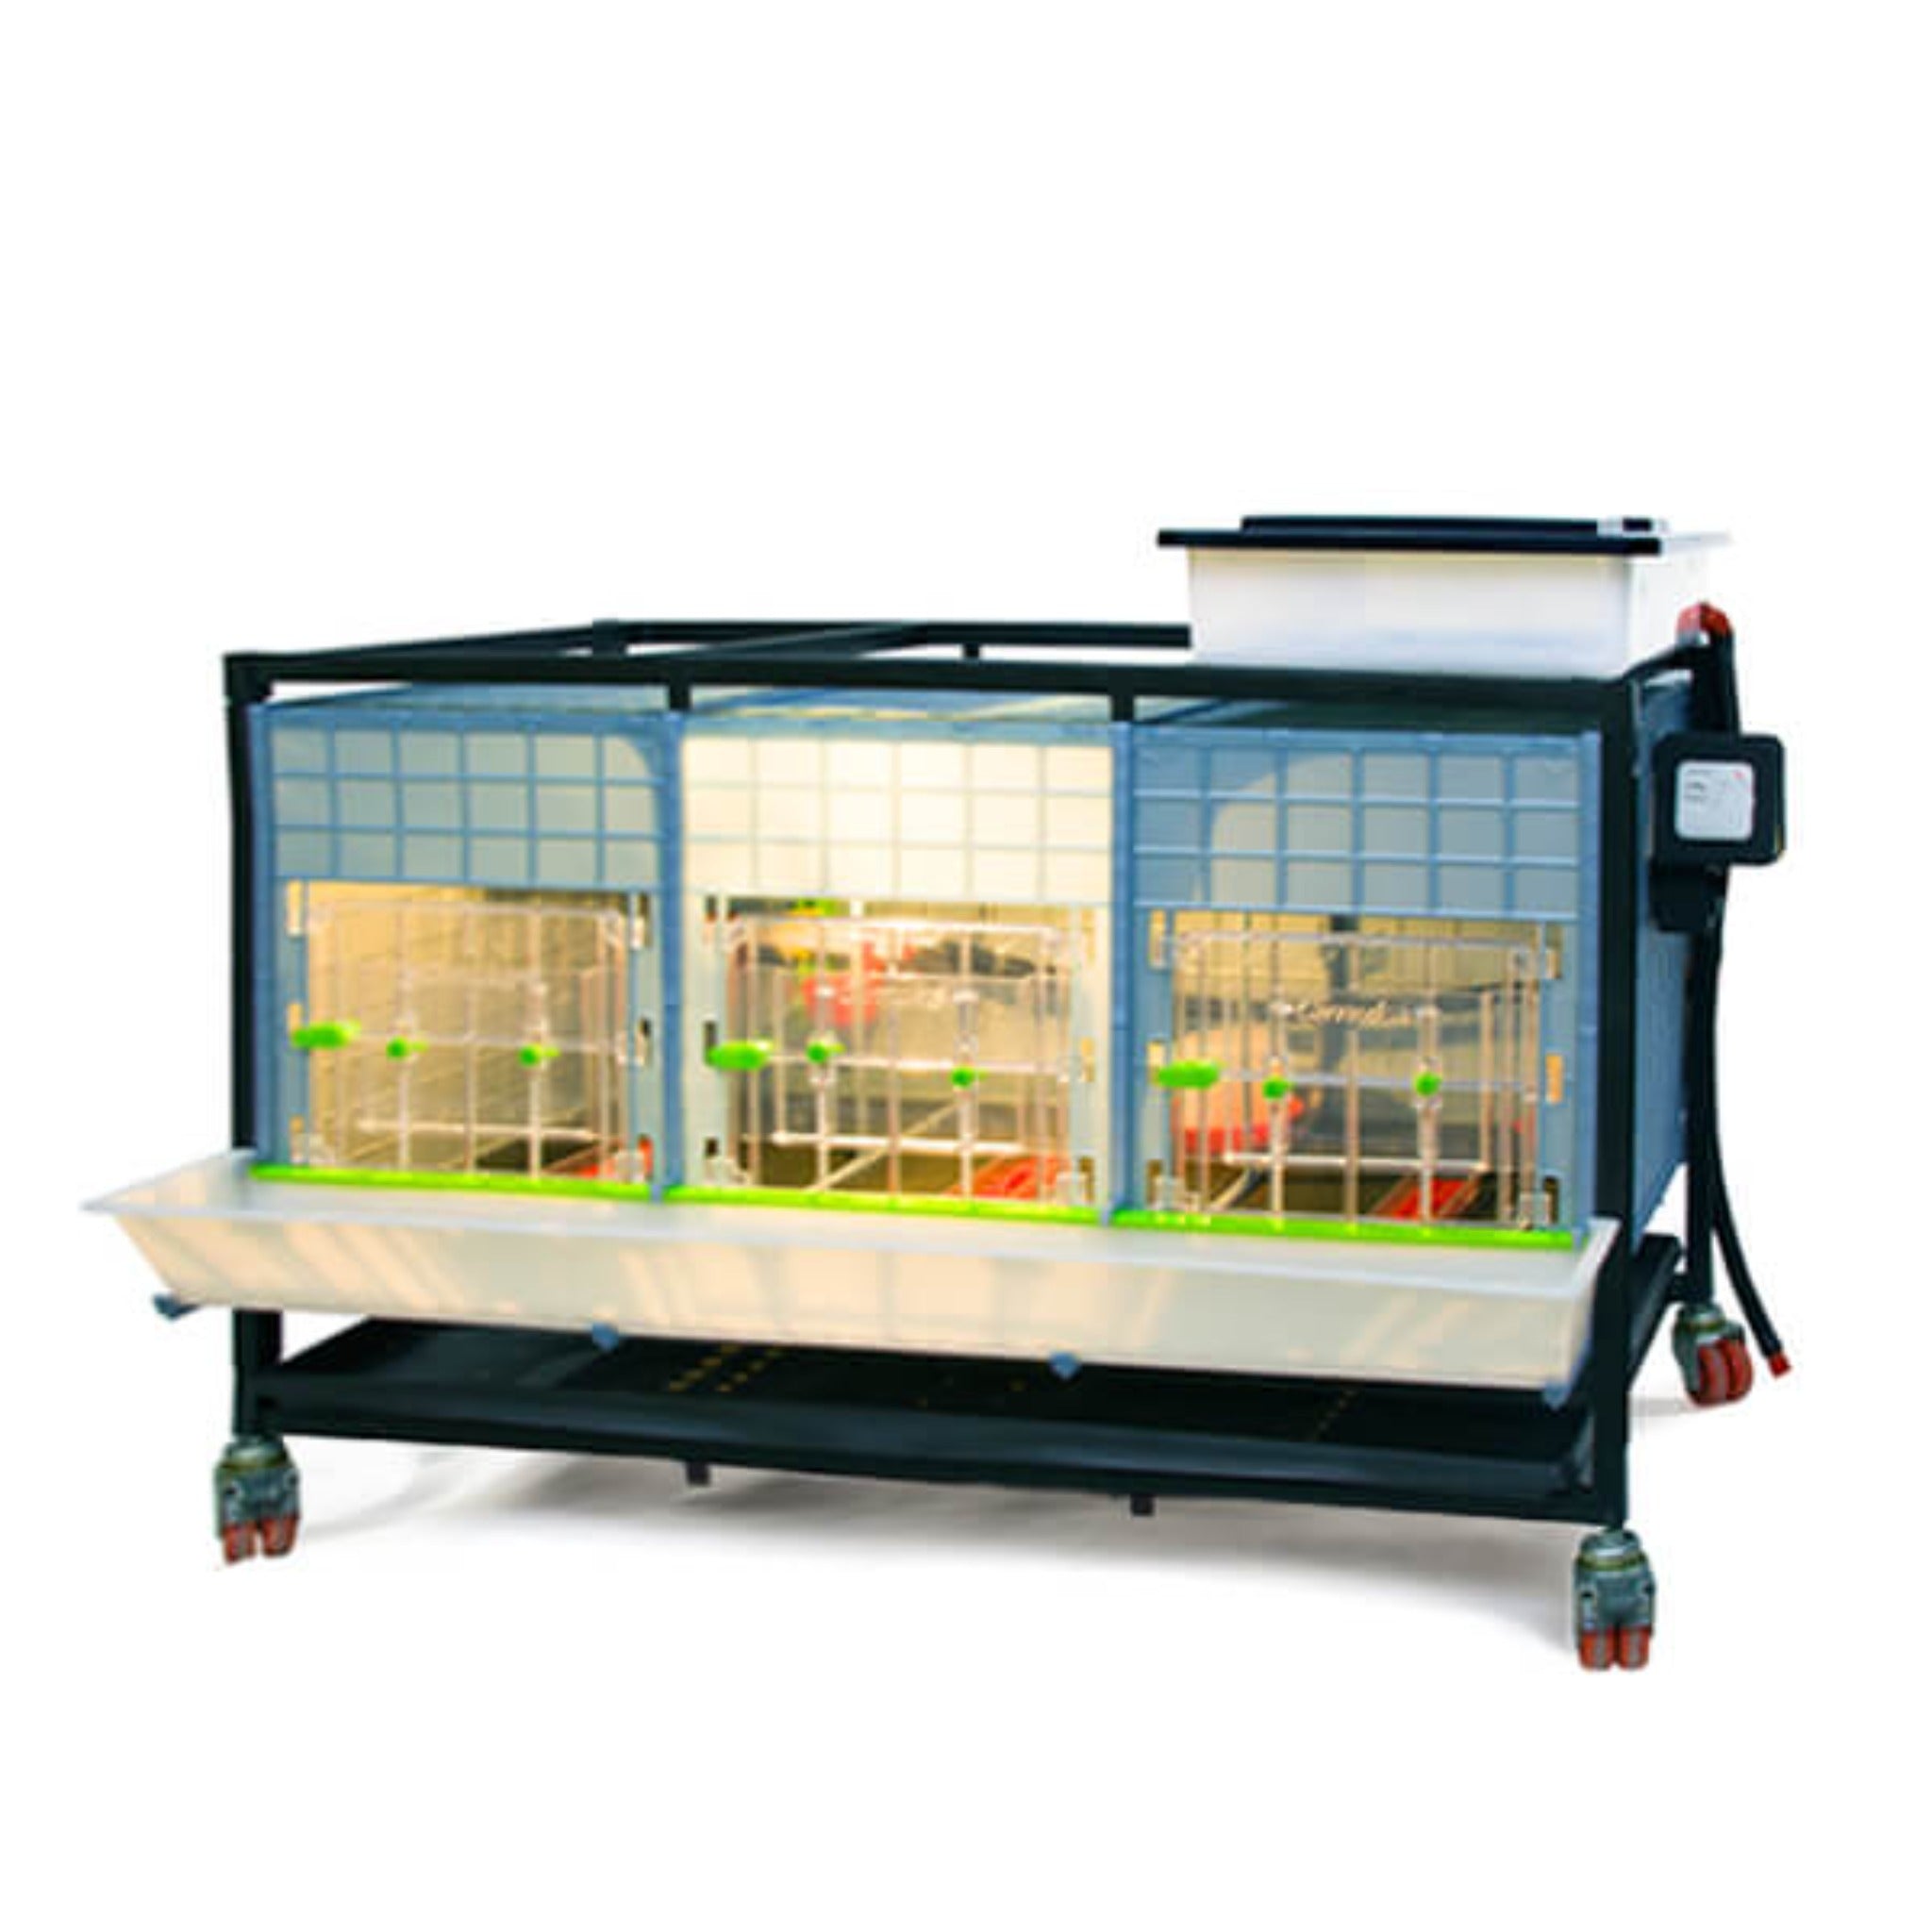 Hatching Time Cimuka 1 Layer 15 Inch Brooder front visible with light on. Feeding trough is located on front of brooders. Clear plastic doors with locks can be seen. Heater thermostat visible on side of brooders. Brooders are on Metal frame with rolling casters for mobility.